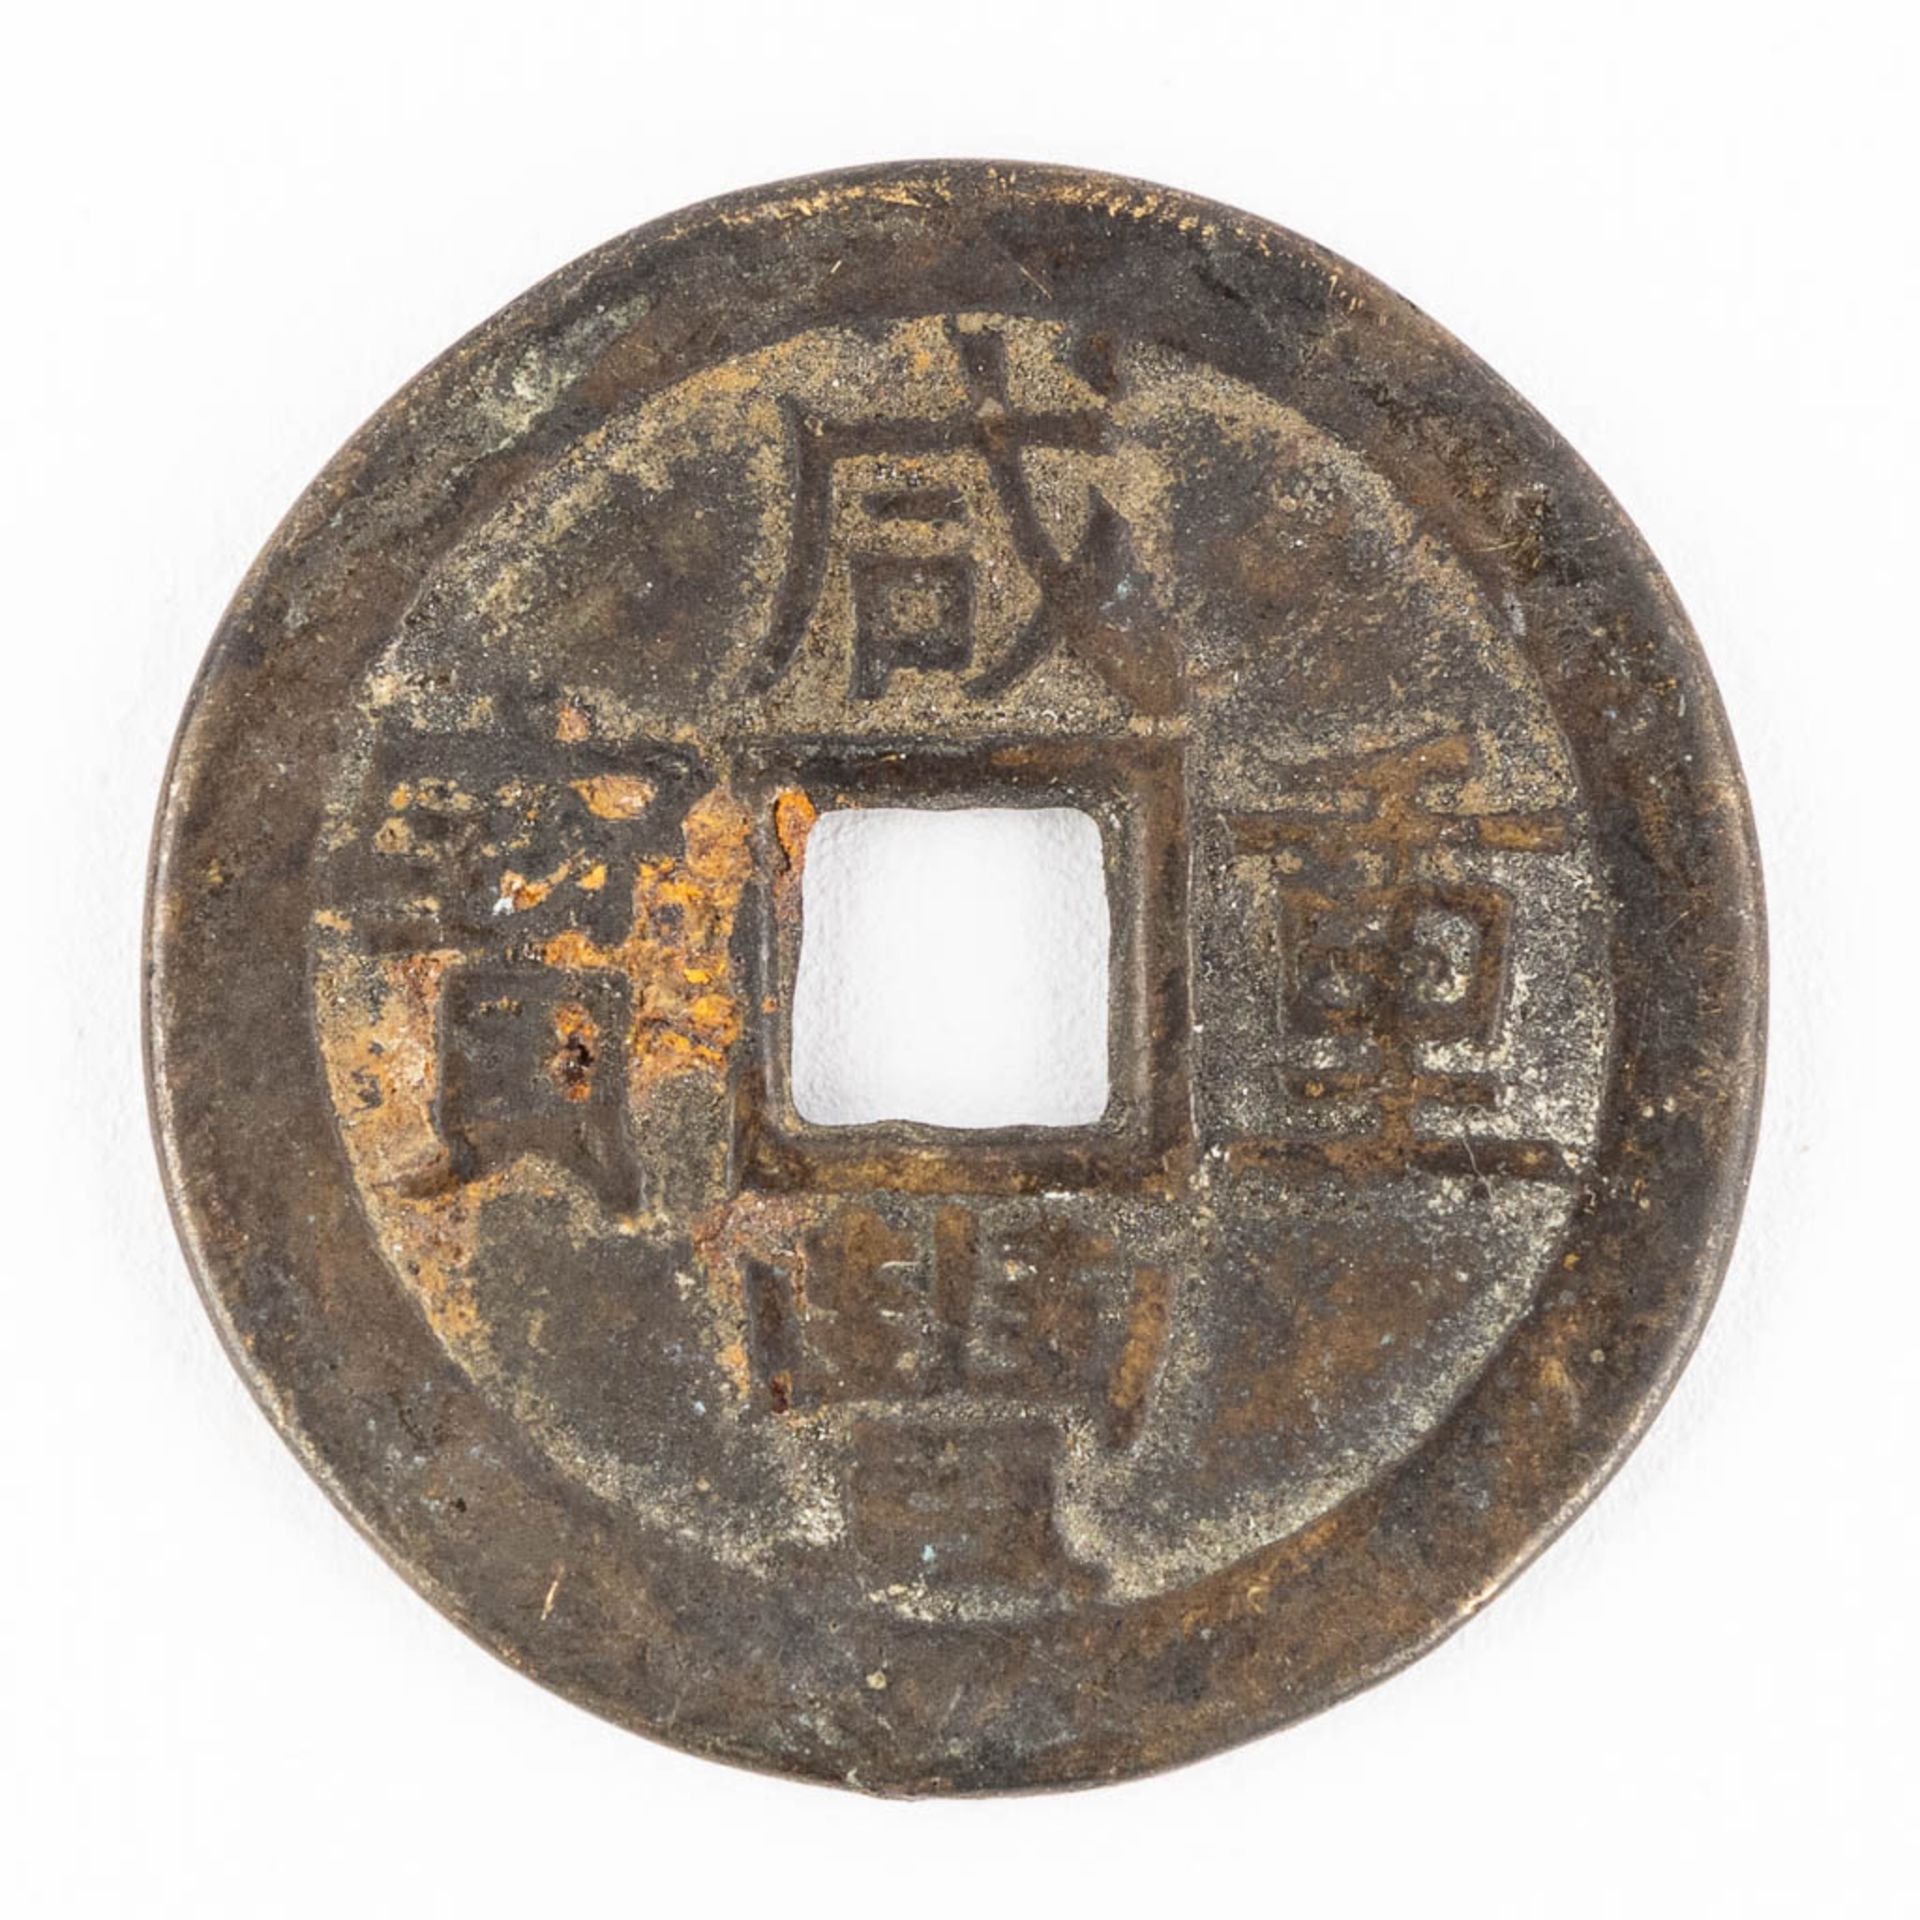 A Chinese insence burner, vase and a lucky coin. Bronze. (H:19 x D:5 cm) - Image 18 of 19